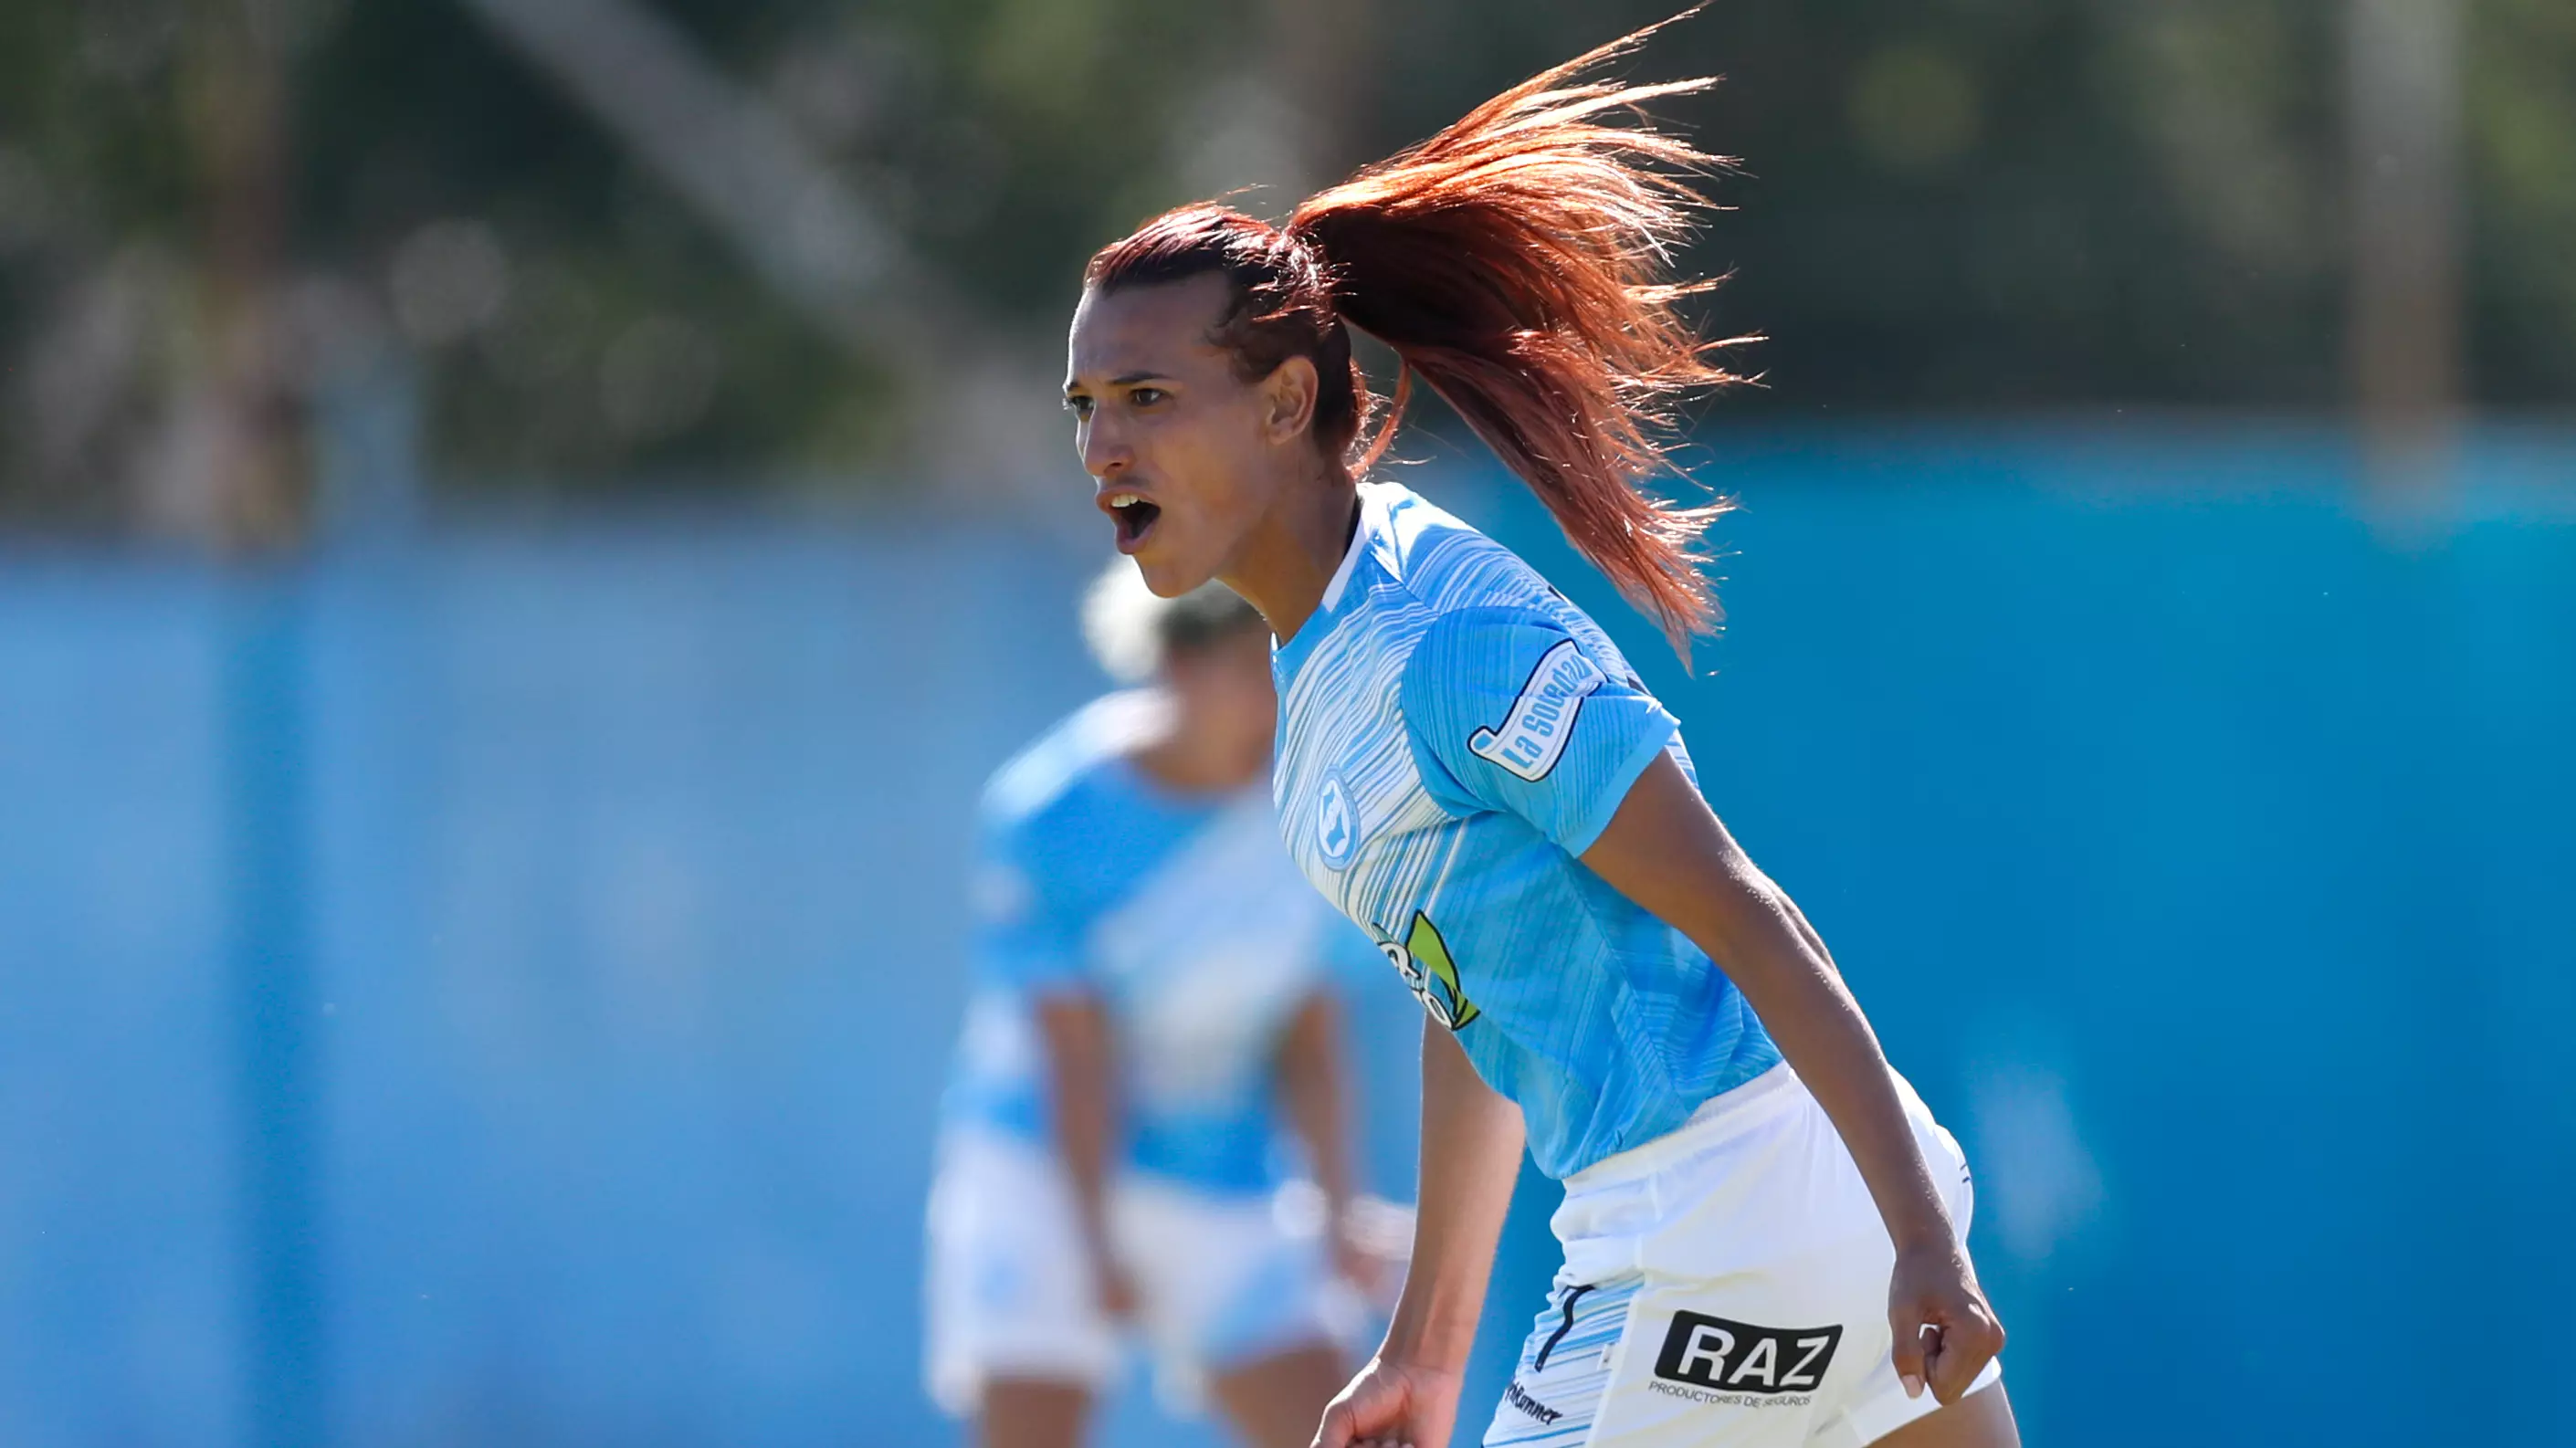 Mara Gomez Becomes First Transgender Woman To Play Professional Football